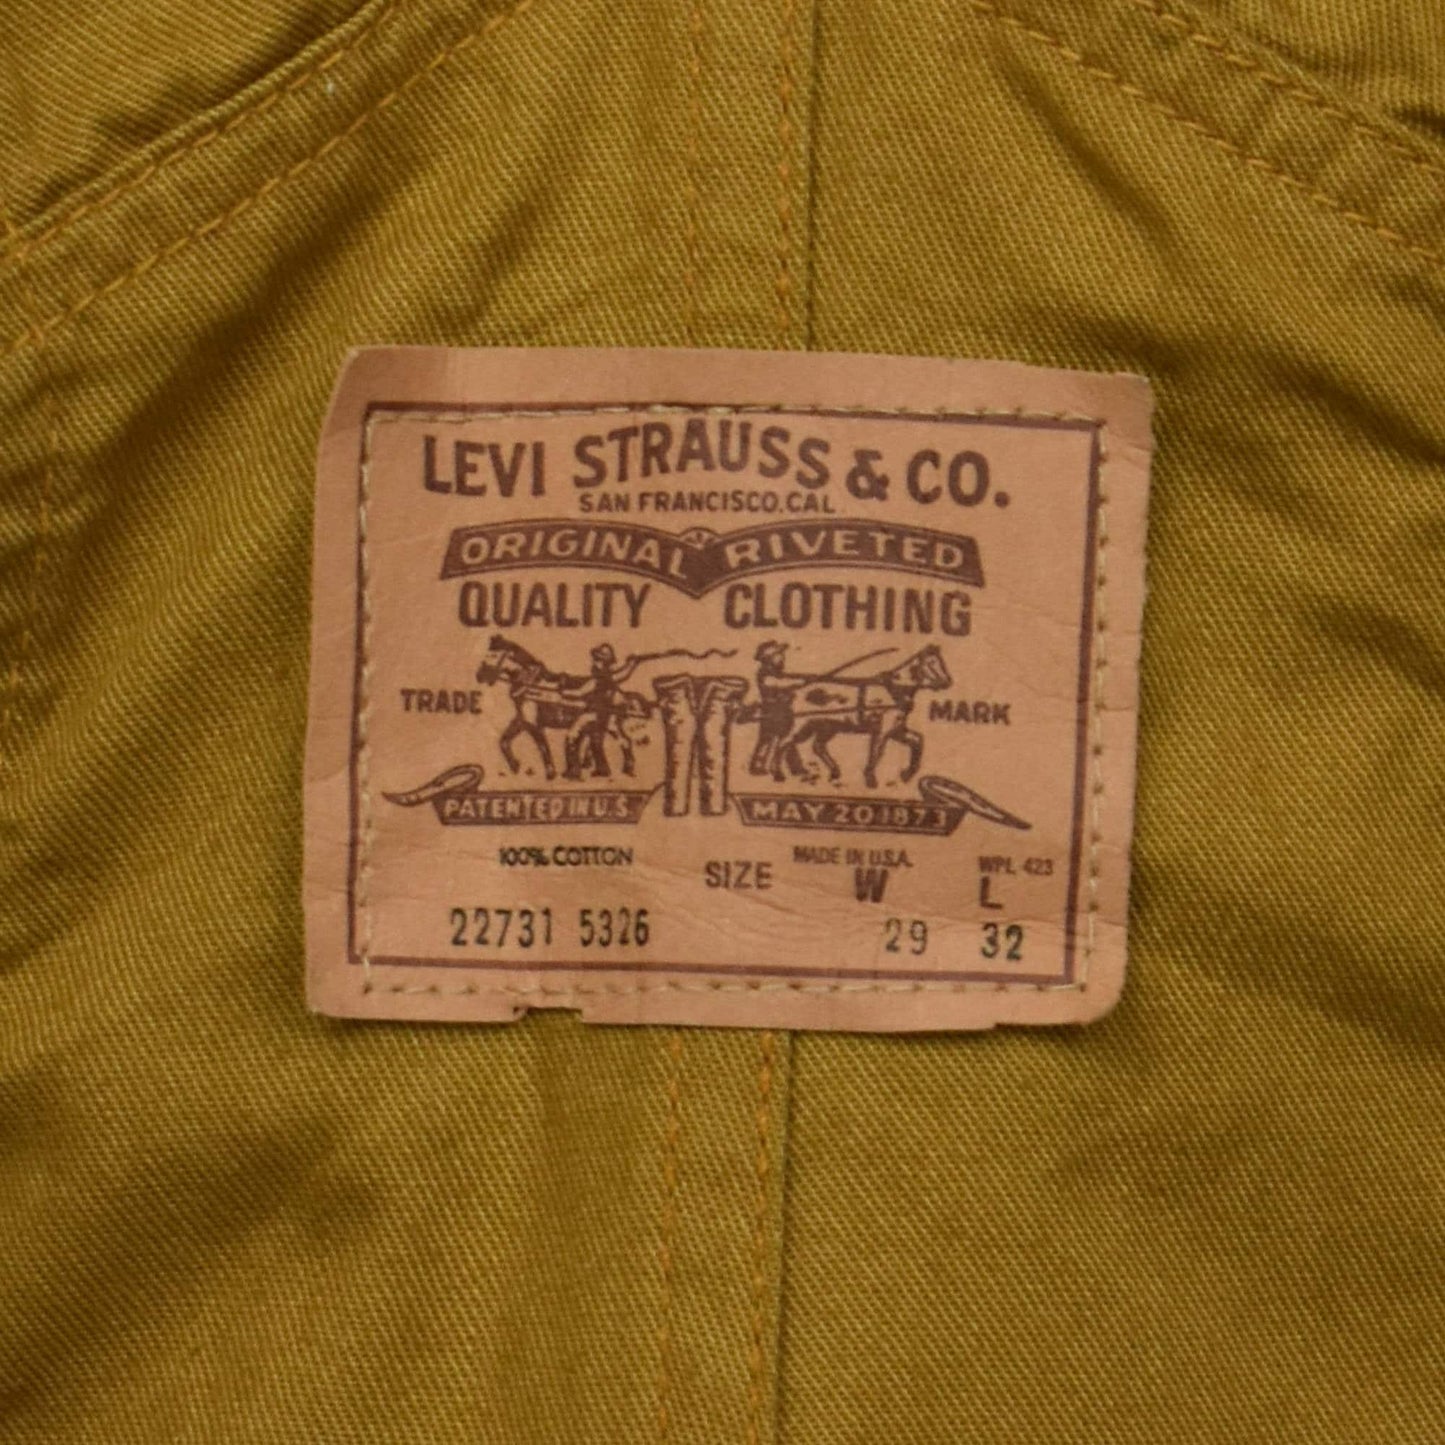 Vintage 50s 60s Caramel Levi's Overall - Made in USA - Big E Tab - 29" Waist